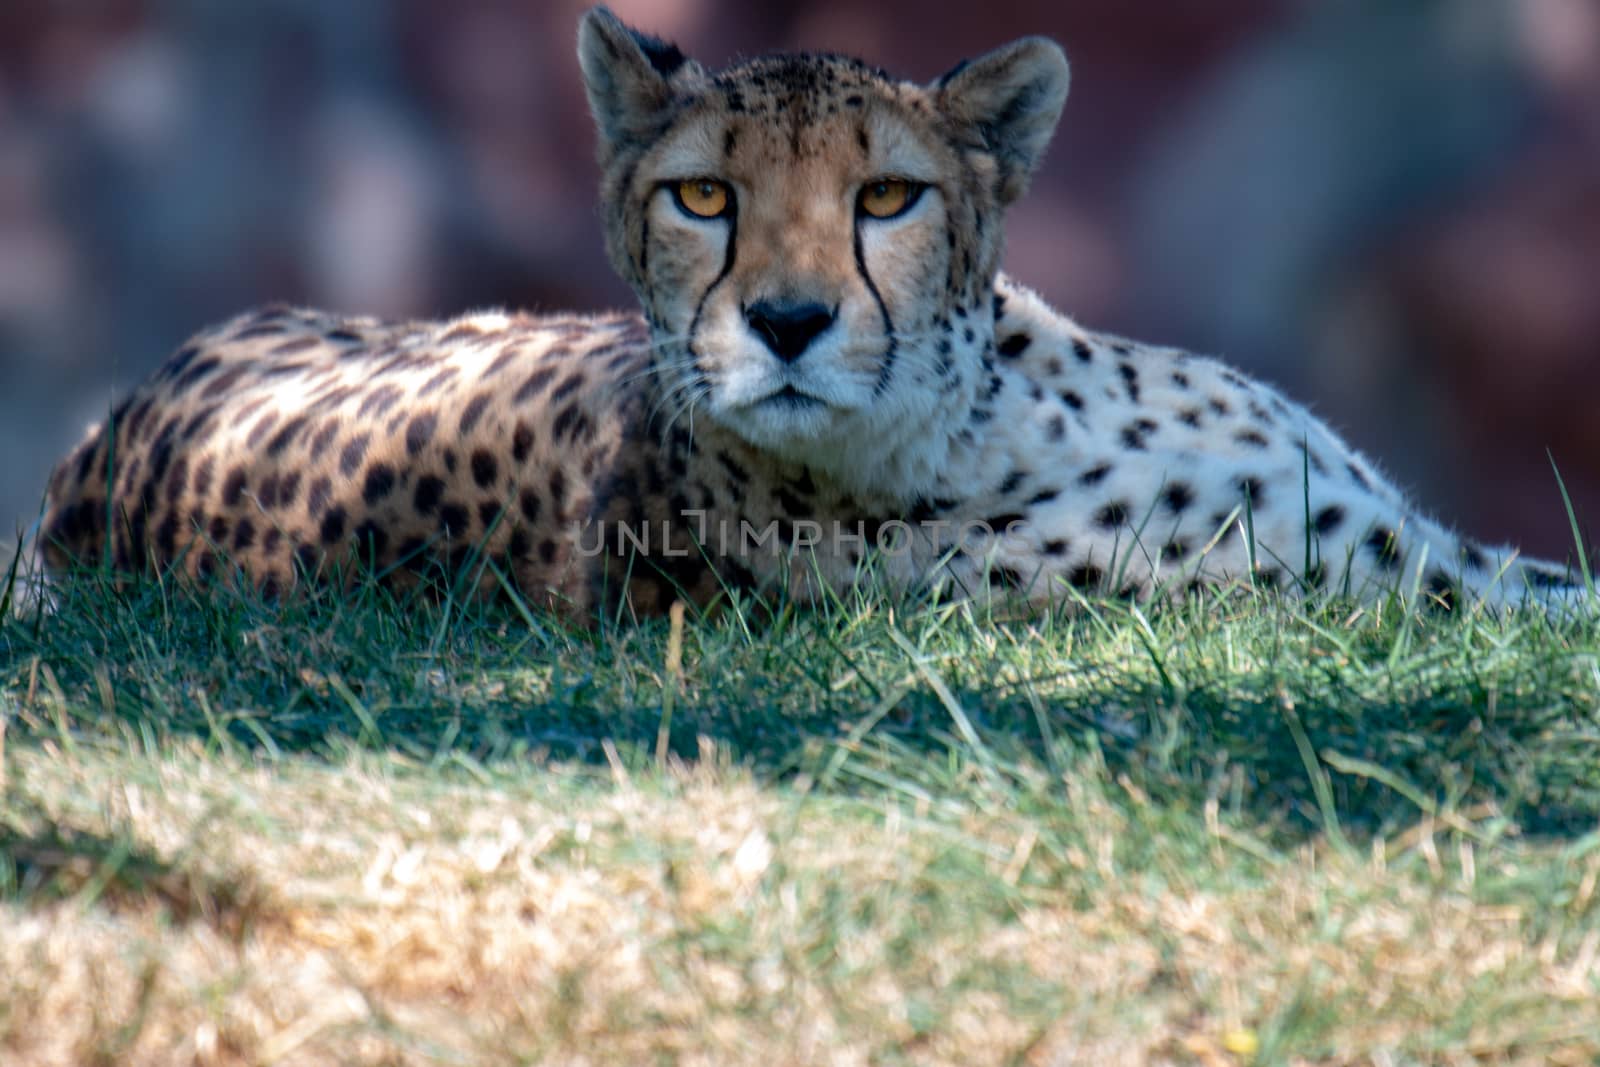 female cheetah laying down in grass after big chase.